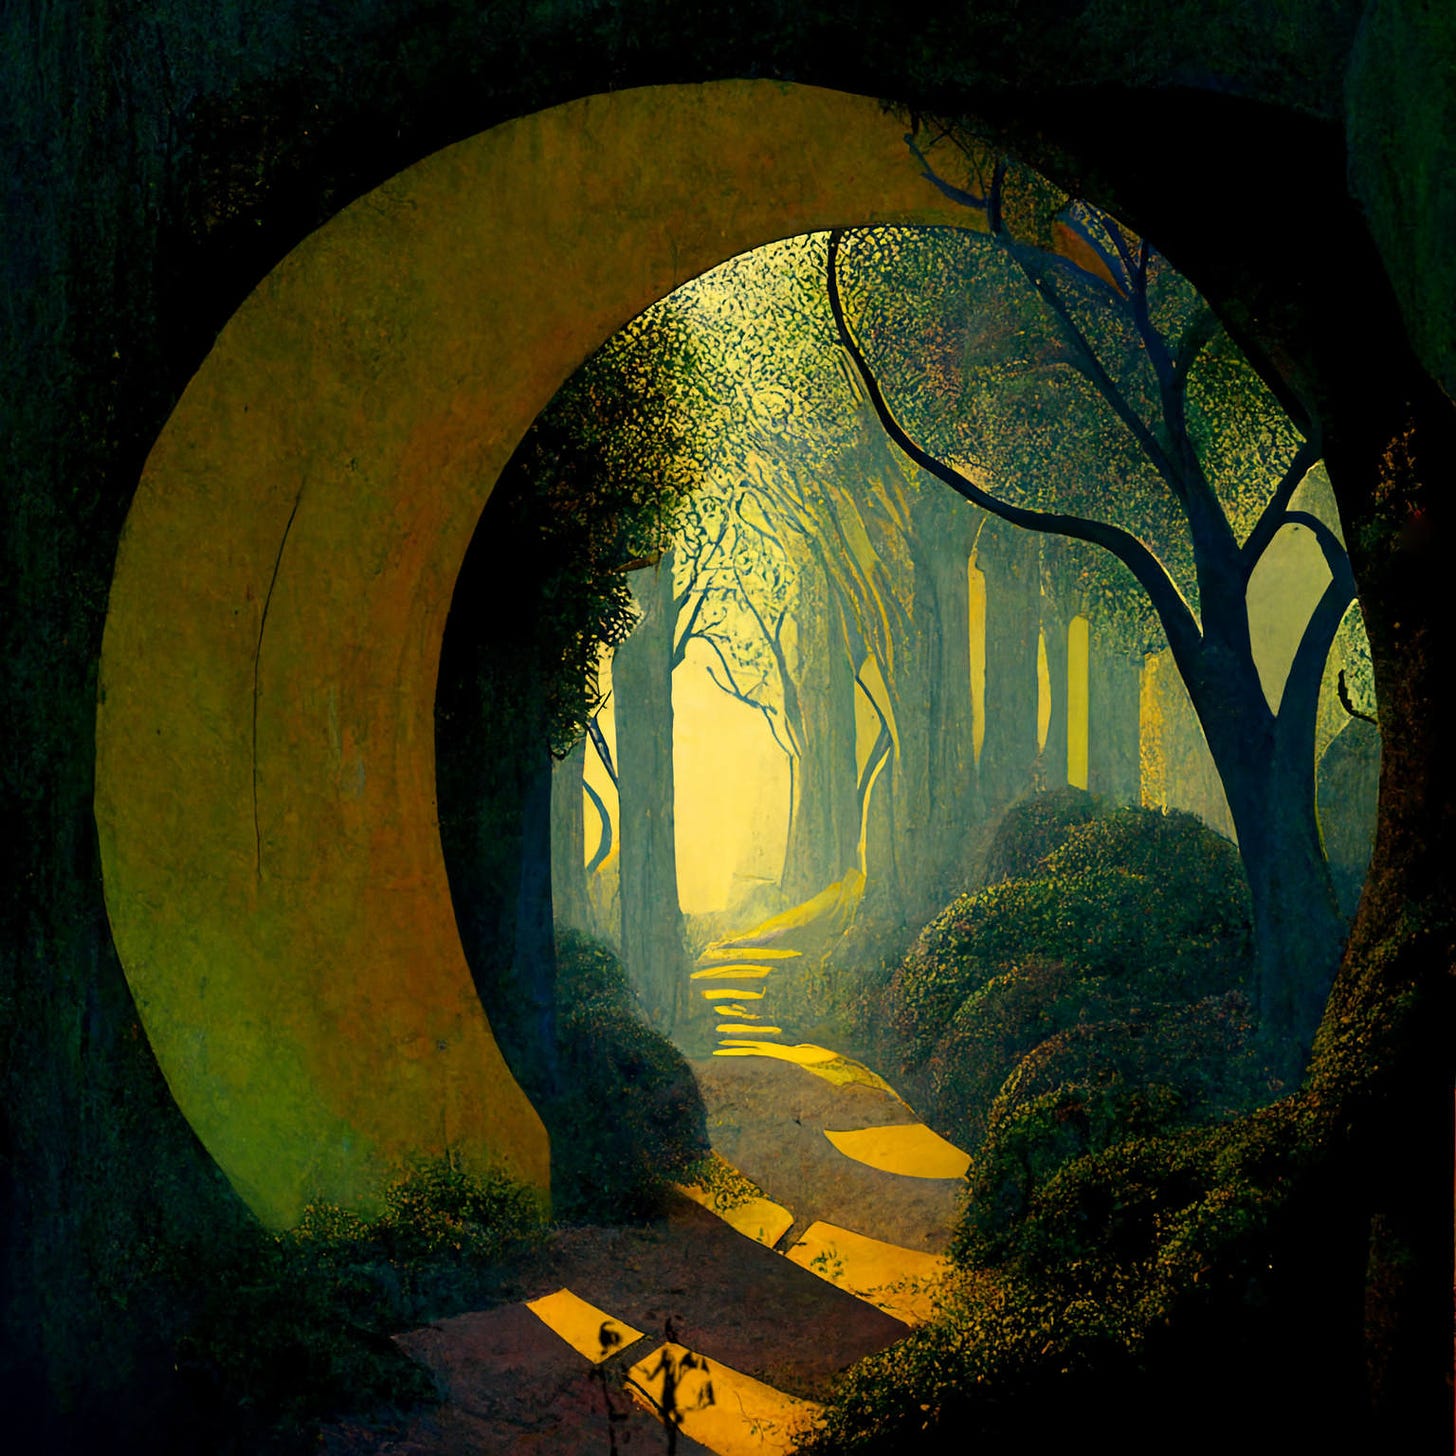 An artistic, whimsical, rendering of a path through the woods.